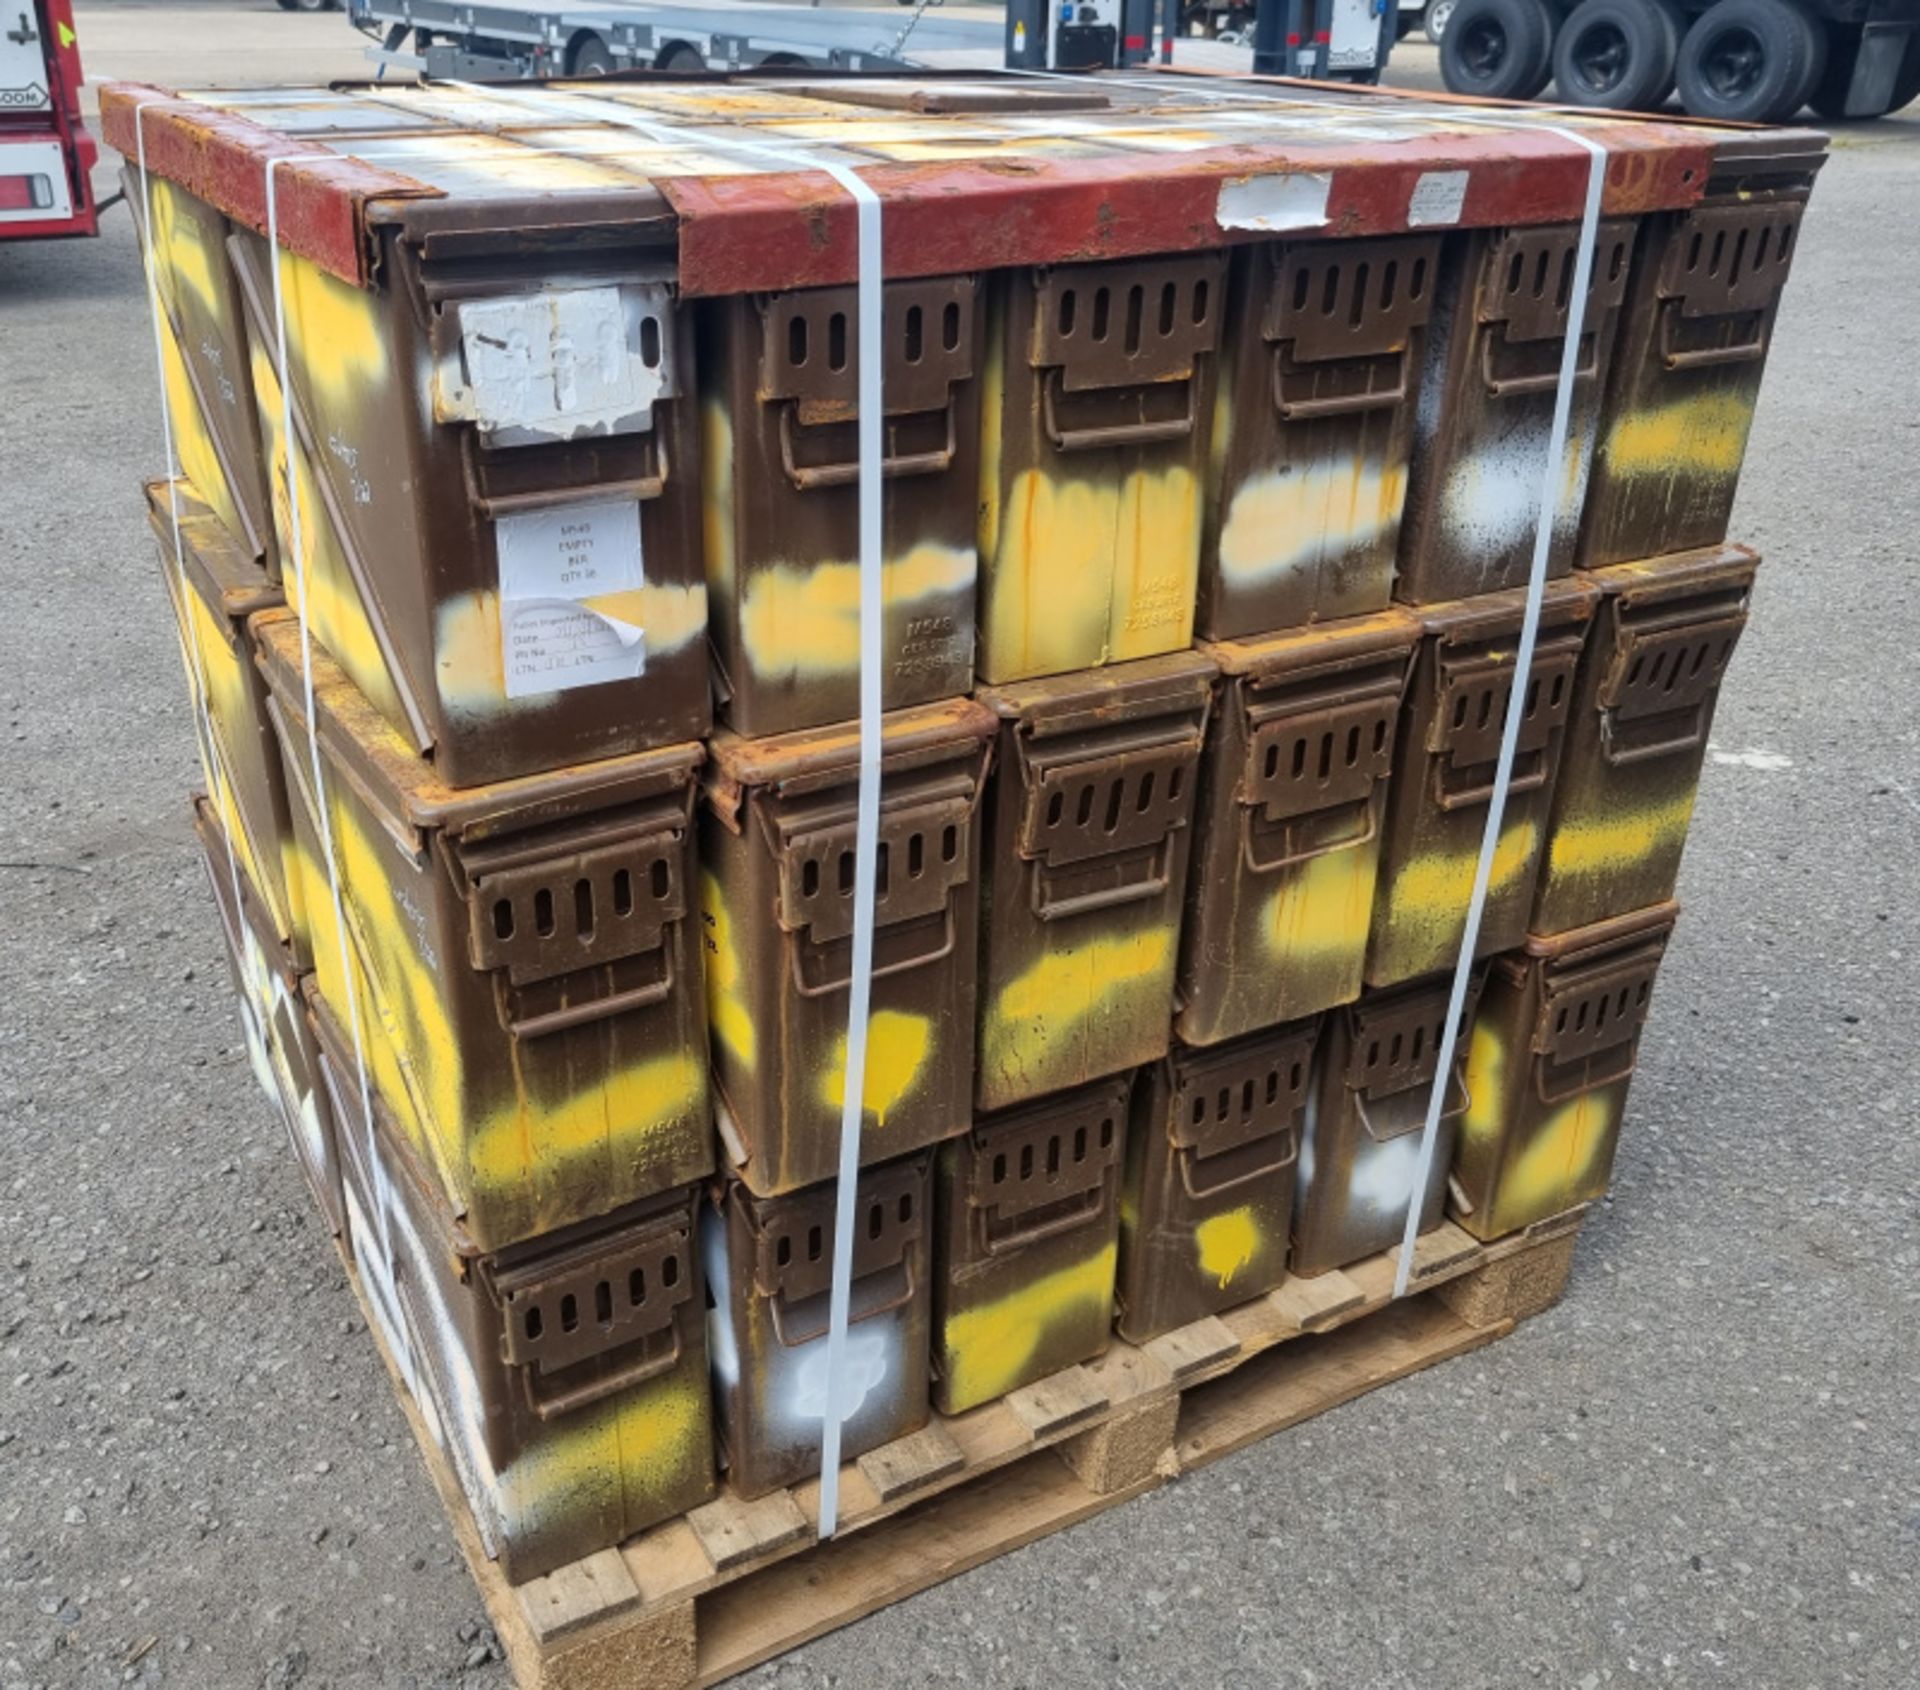 1x Pallet of M548 ammo containers - total quantity 36 - Image 3 of 12